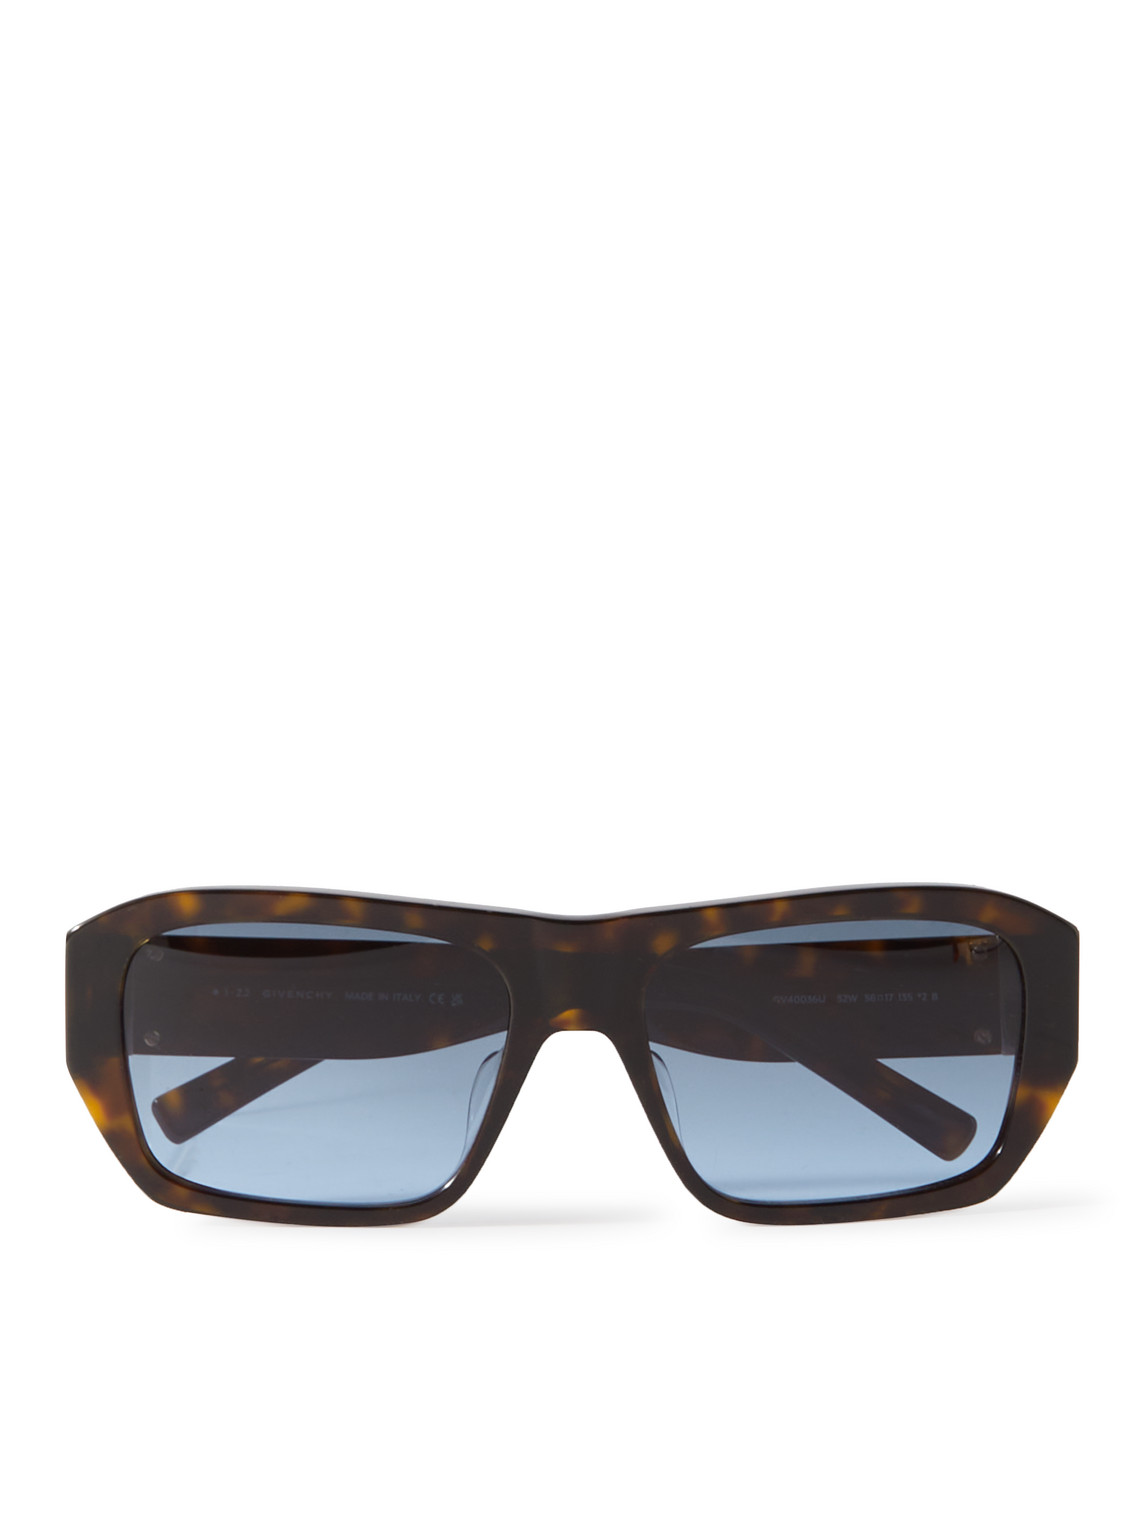 Givenchy 4g Sun Square-frame Tortoiseshell Acetate Sunglasses In Brown